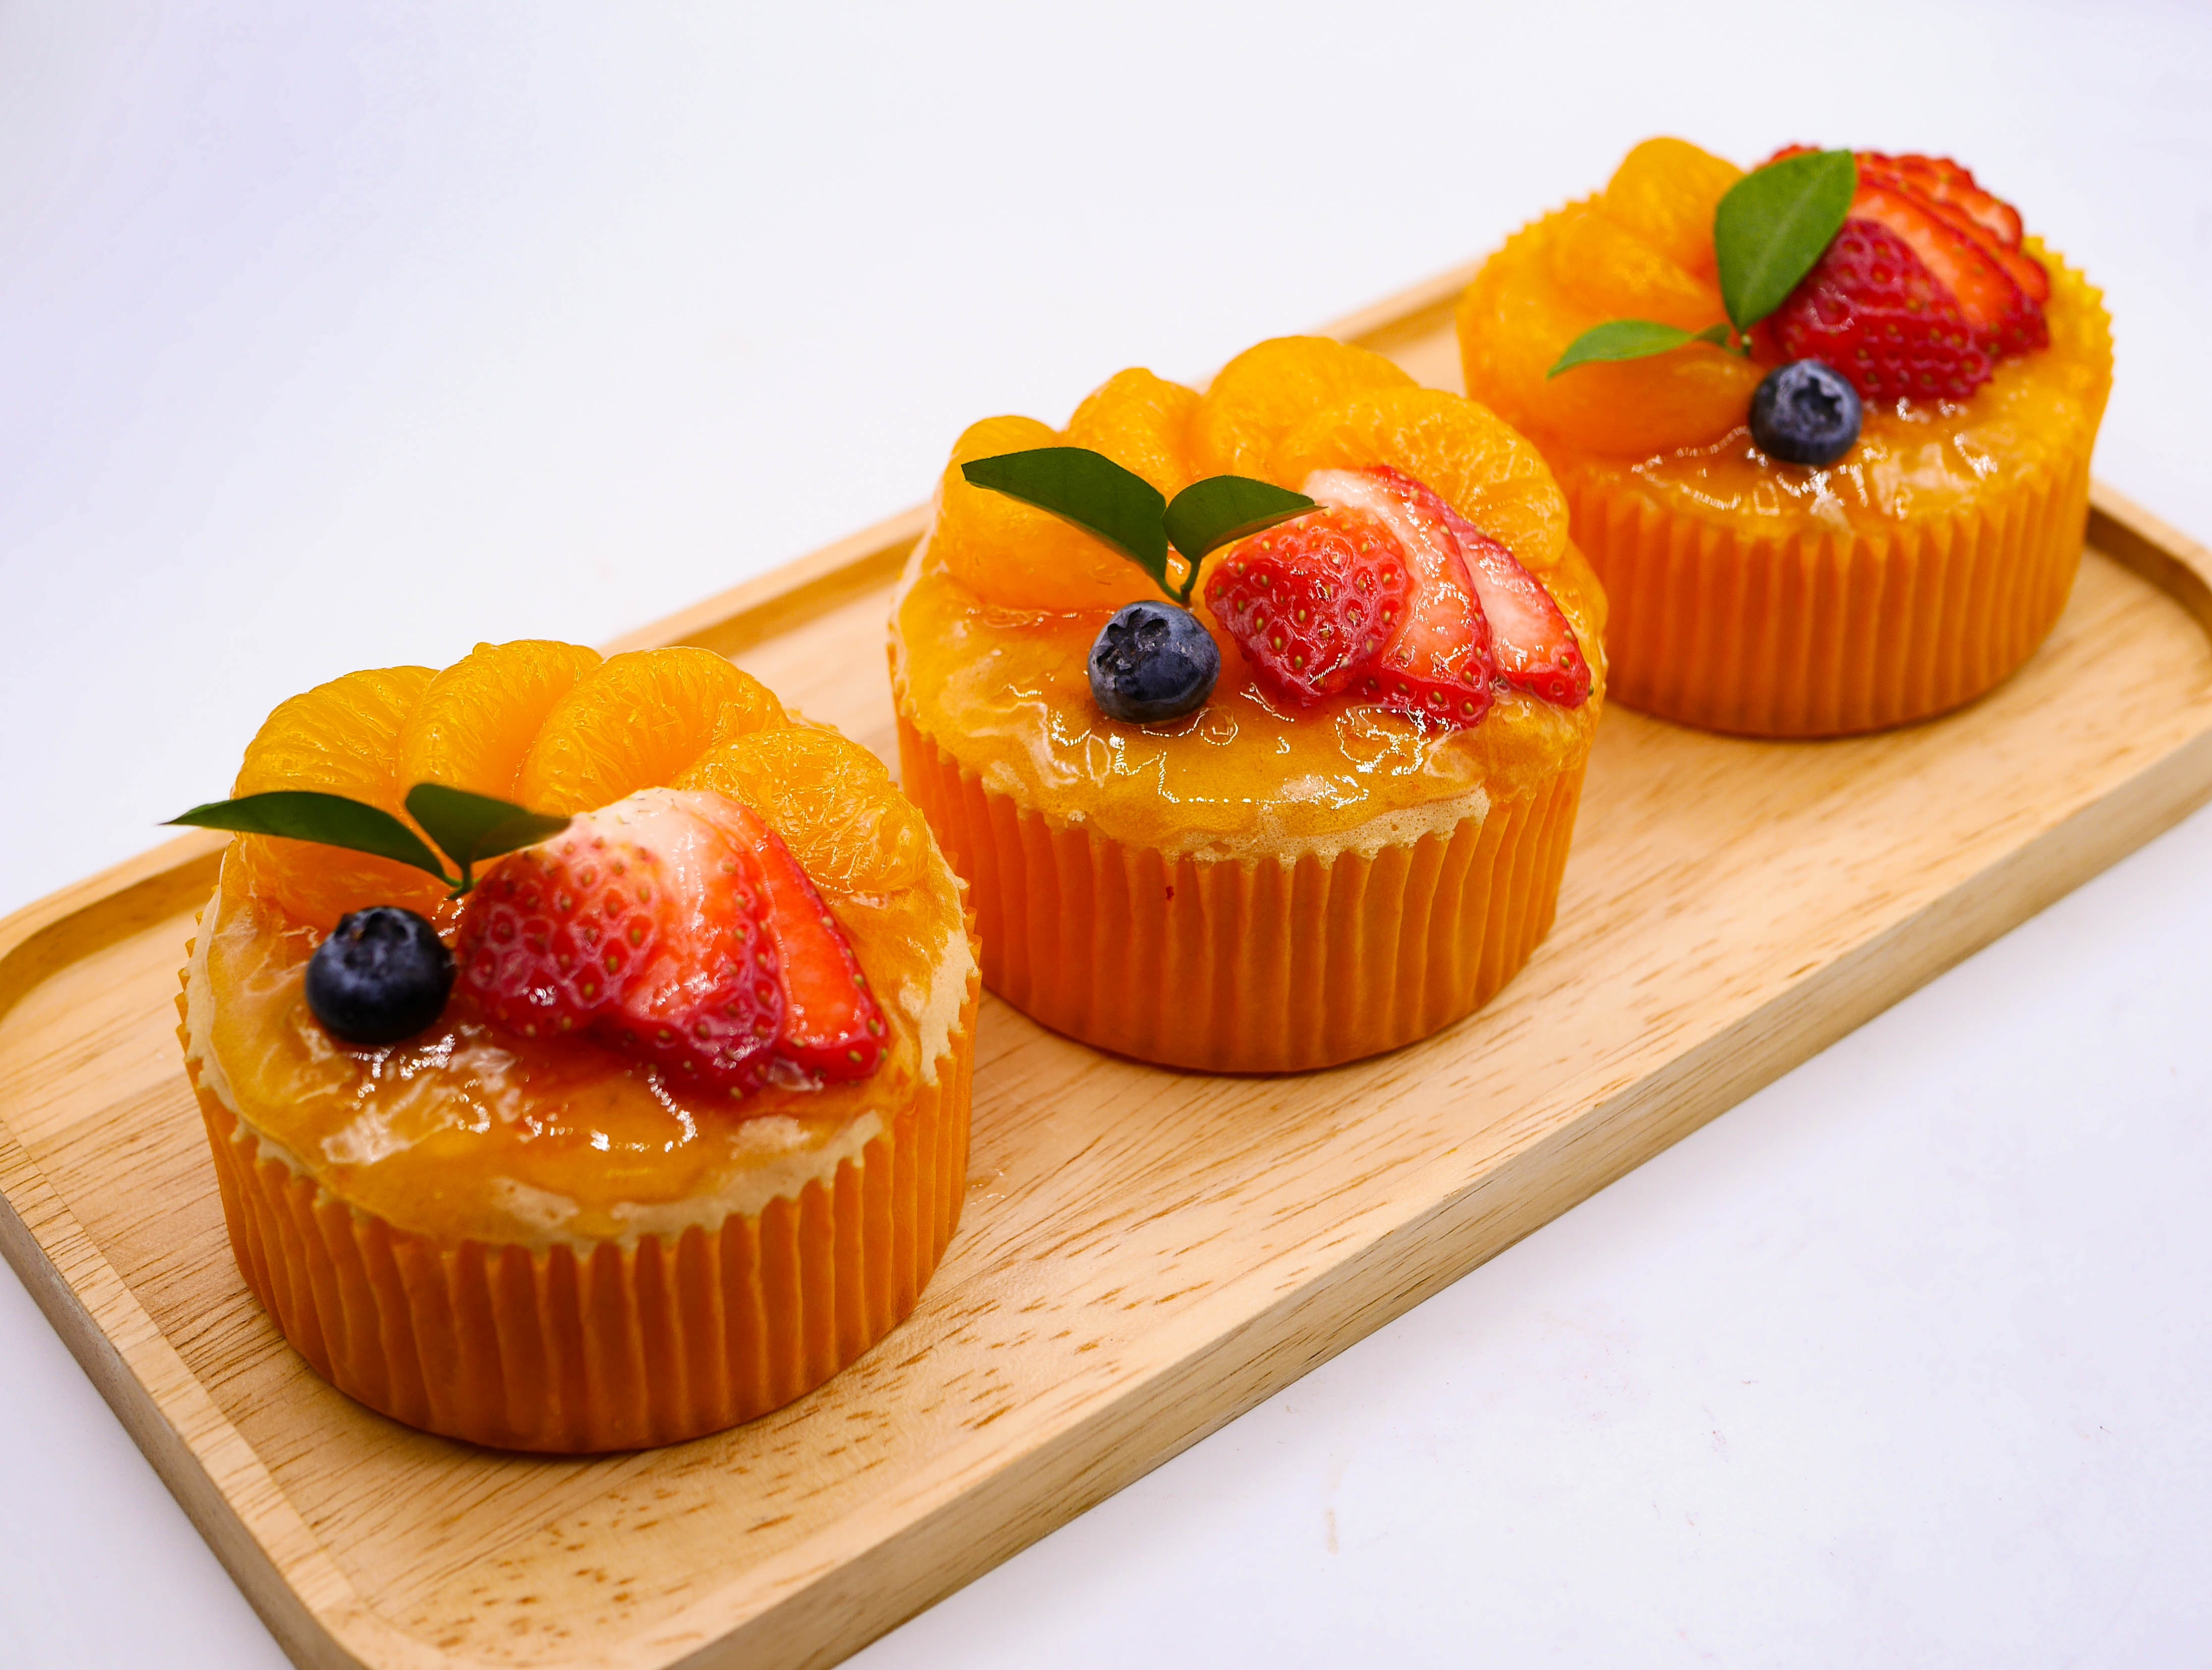 Fresh baked sweet and delicious mandarin orange sponge cake decorated with orange jelly sauce and orange pulp and Strawberry on  wood tray with white background. Homemade bakery concept for cafe